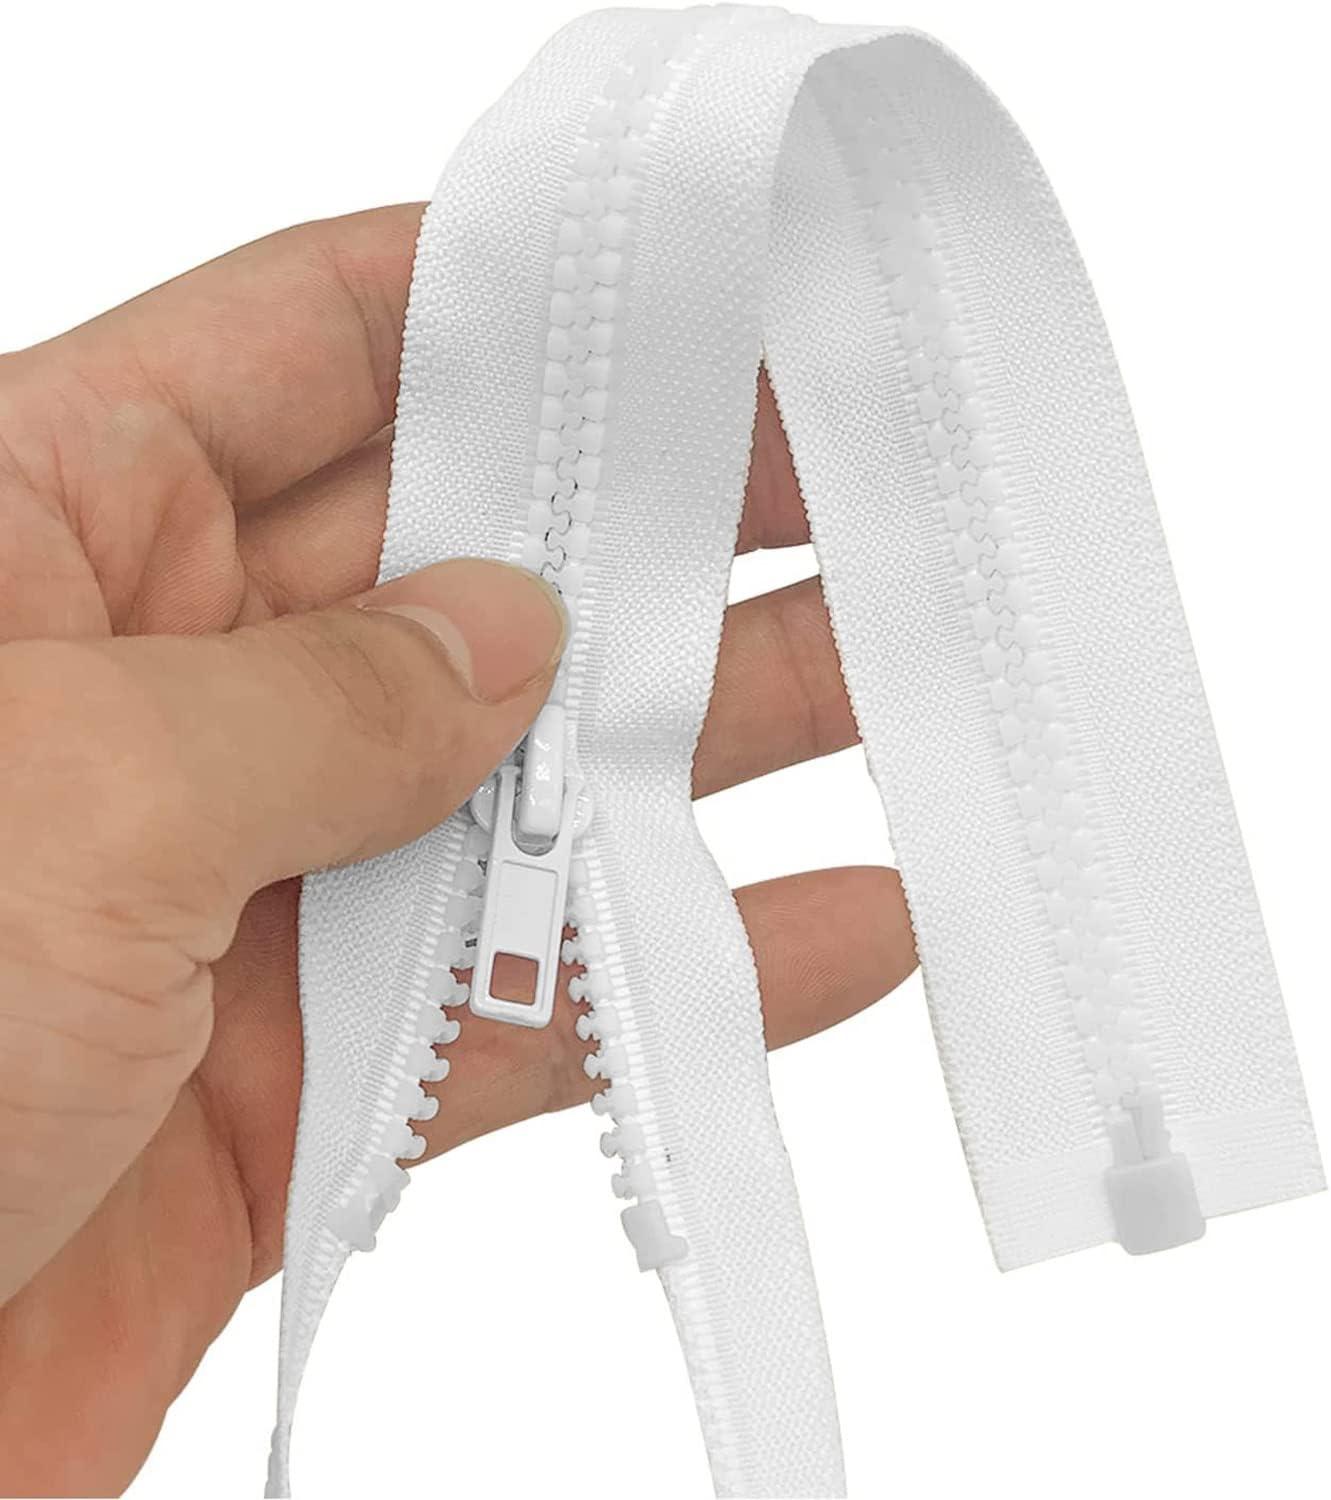 Sawoake 2PCS 5 6 Inch Separating Jacket Zippers for Sewing Coats Jacket  Zipper White Molded Plastic Zippers Bulk Tailor DIY Sewing Tools for  Garment/Bags/Home Textile